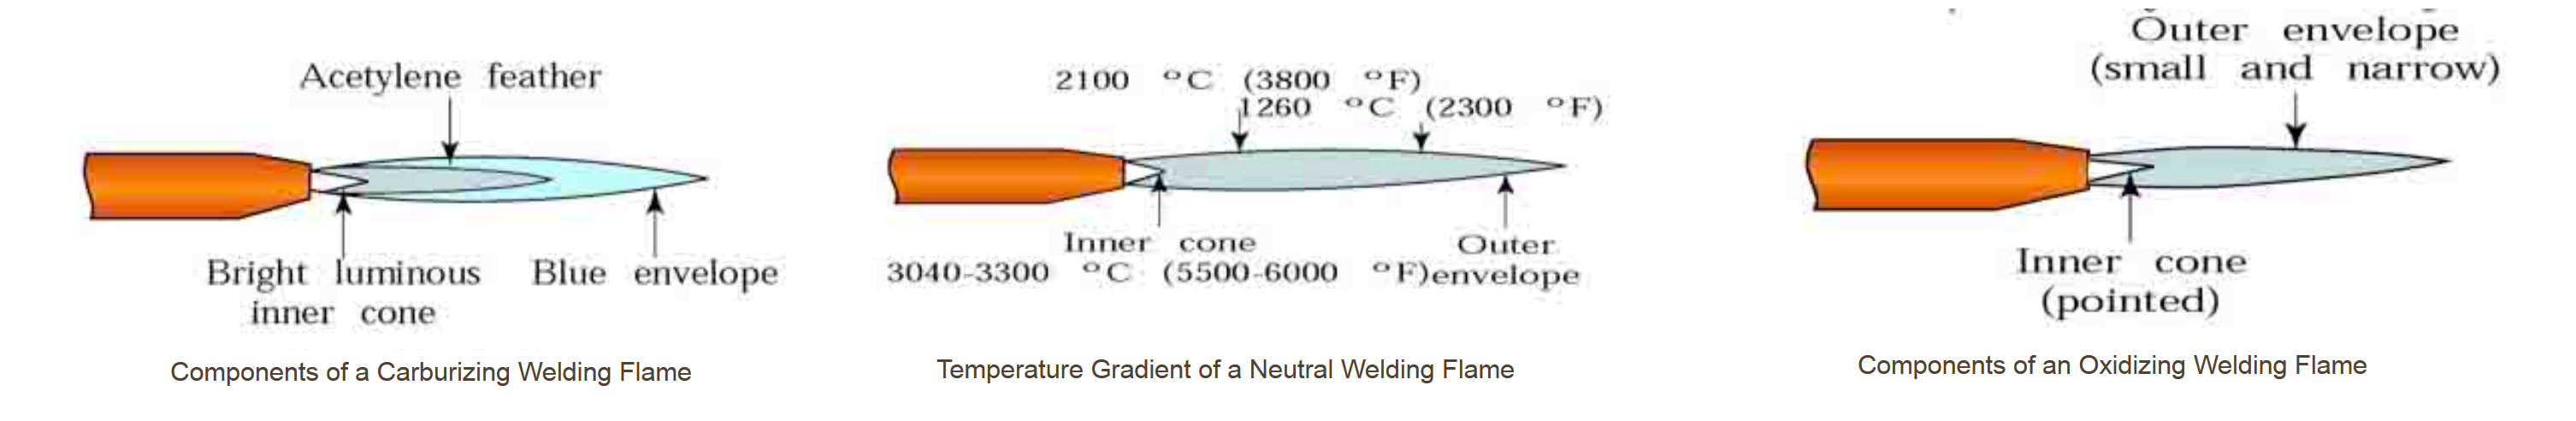 File:Oxy acetylene flames.png